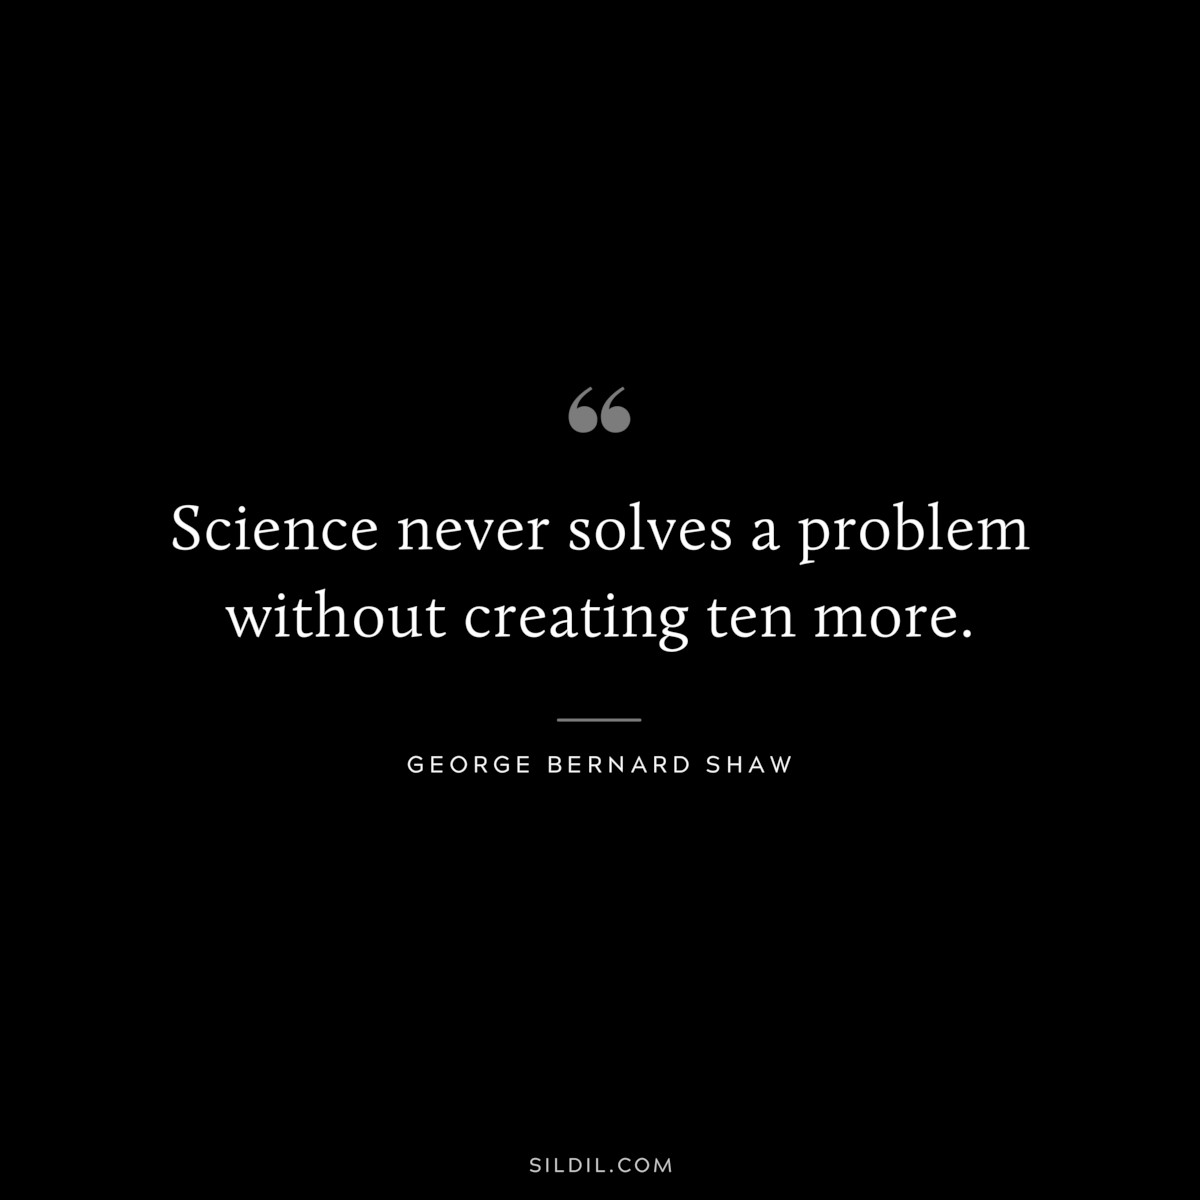 Science never solves a problem without creating ten more. ― George Bernard Shaw